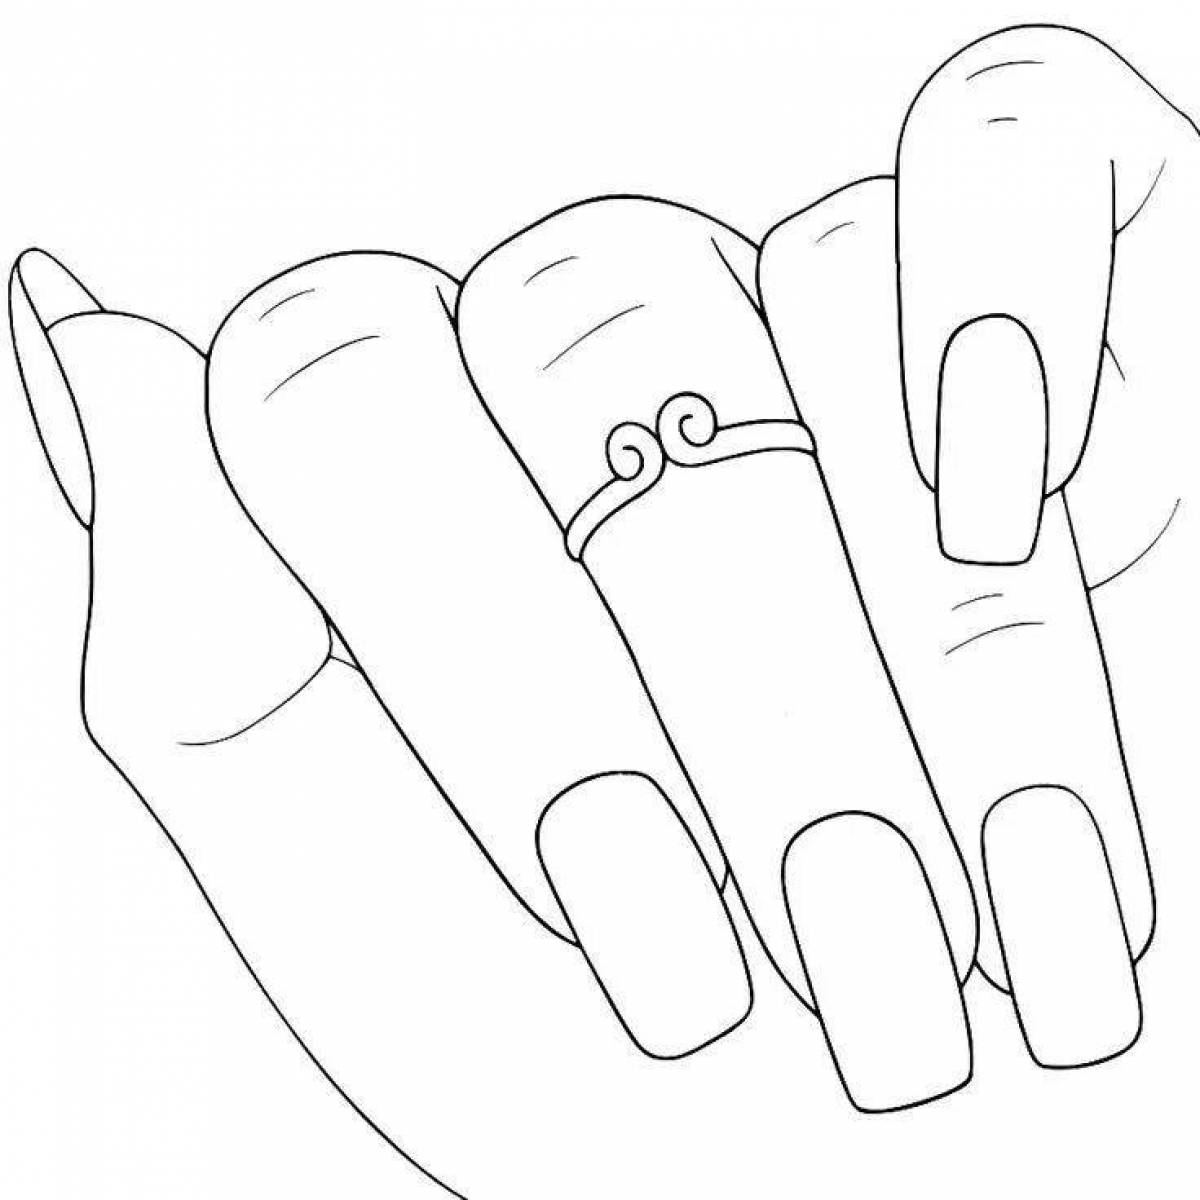 Coloring book glamor hand with long nails